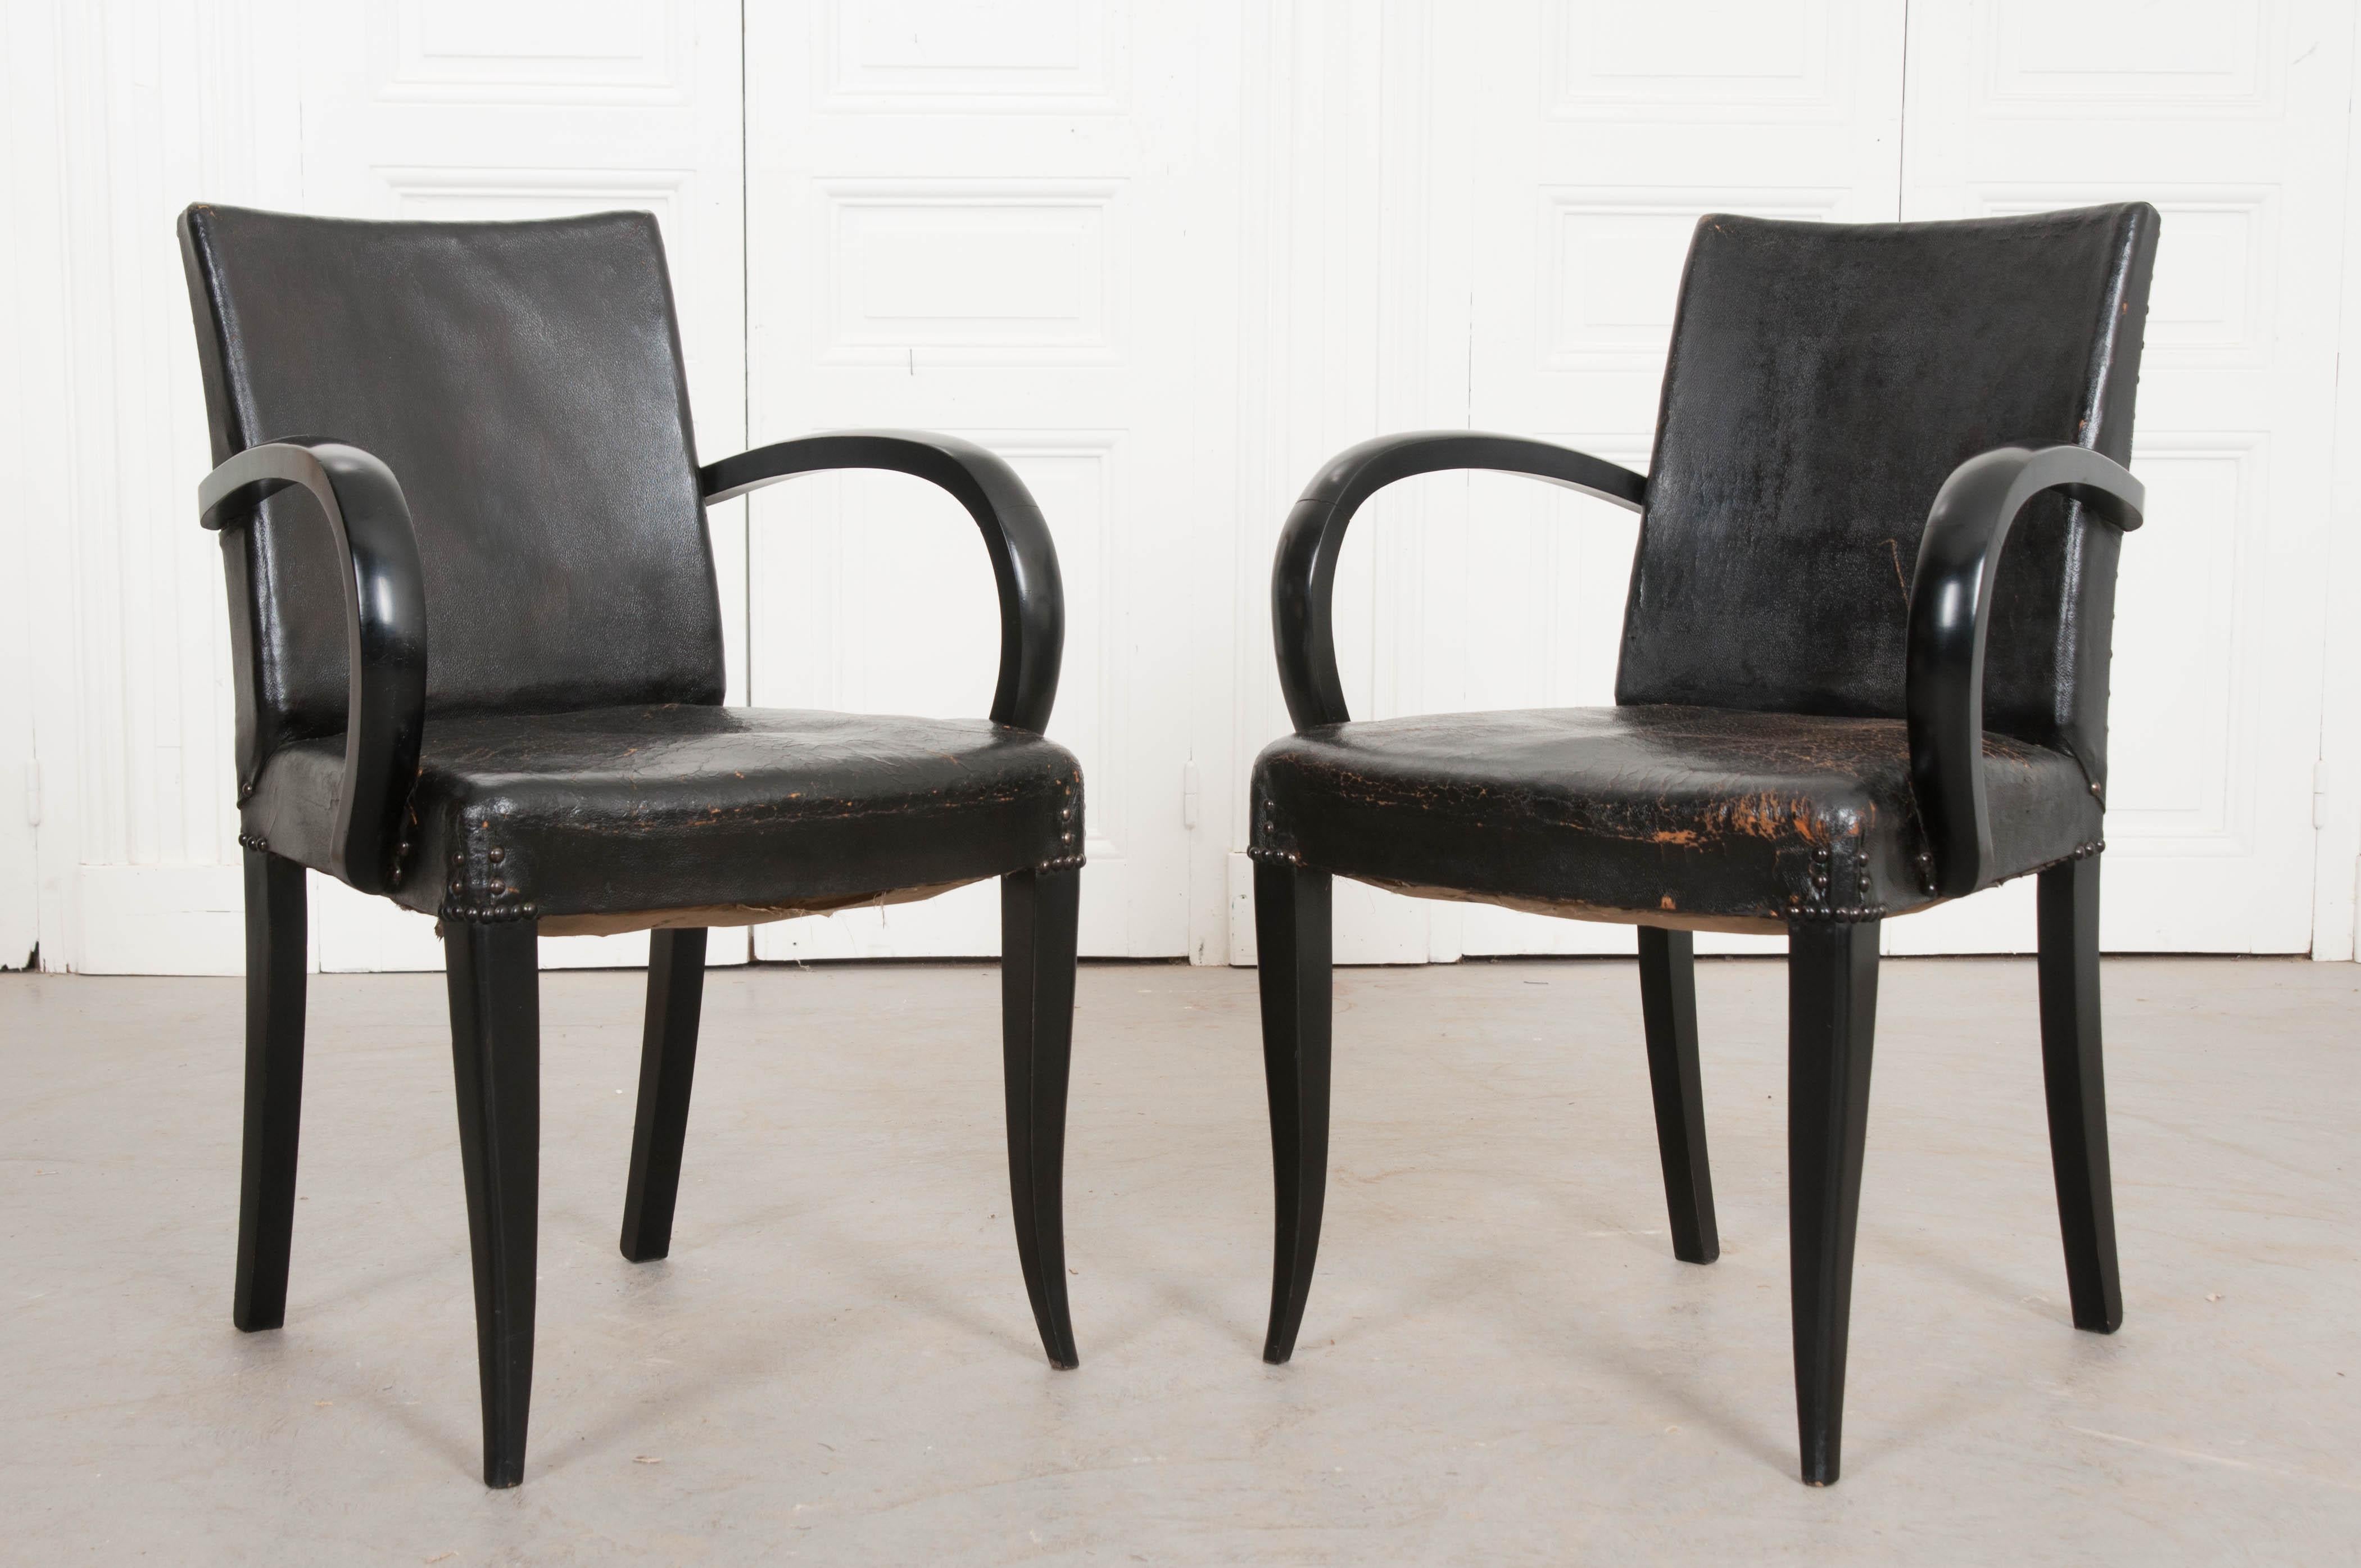 A stylish pair of ebonized Art Deco period armchairs from 1930s France. The chairs have a somewhat simple form, with awesome, arched armrests that take the pair to another level of cool. They are upholstered in their original jet-black leather that